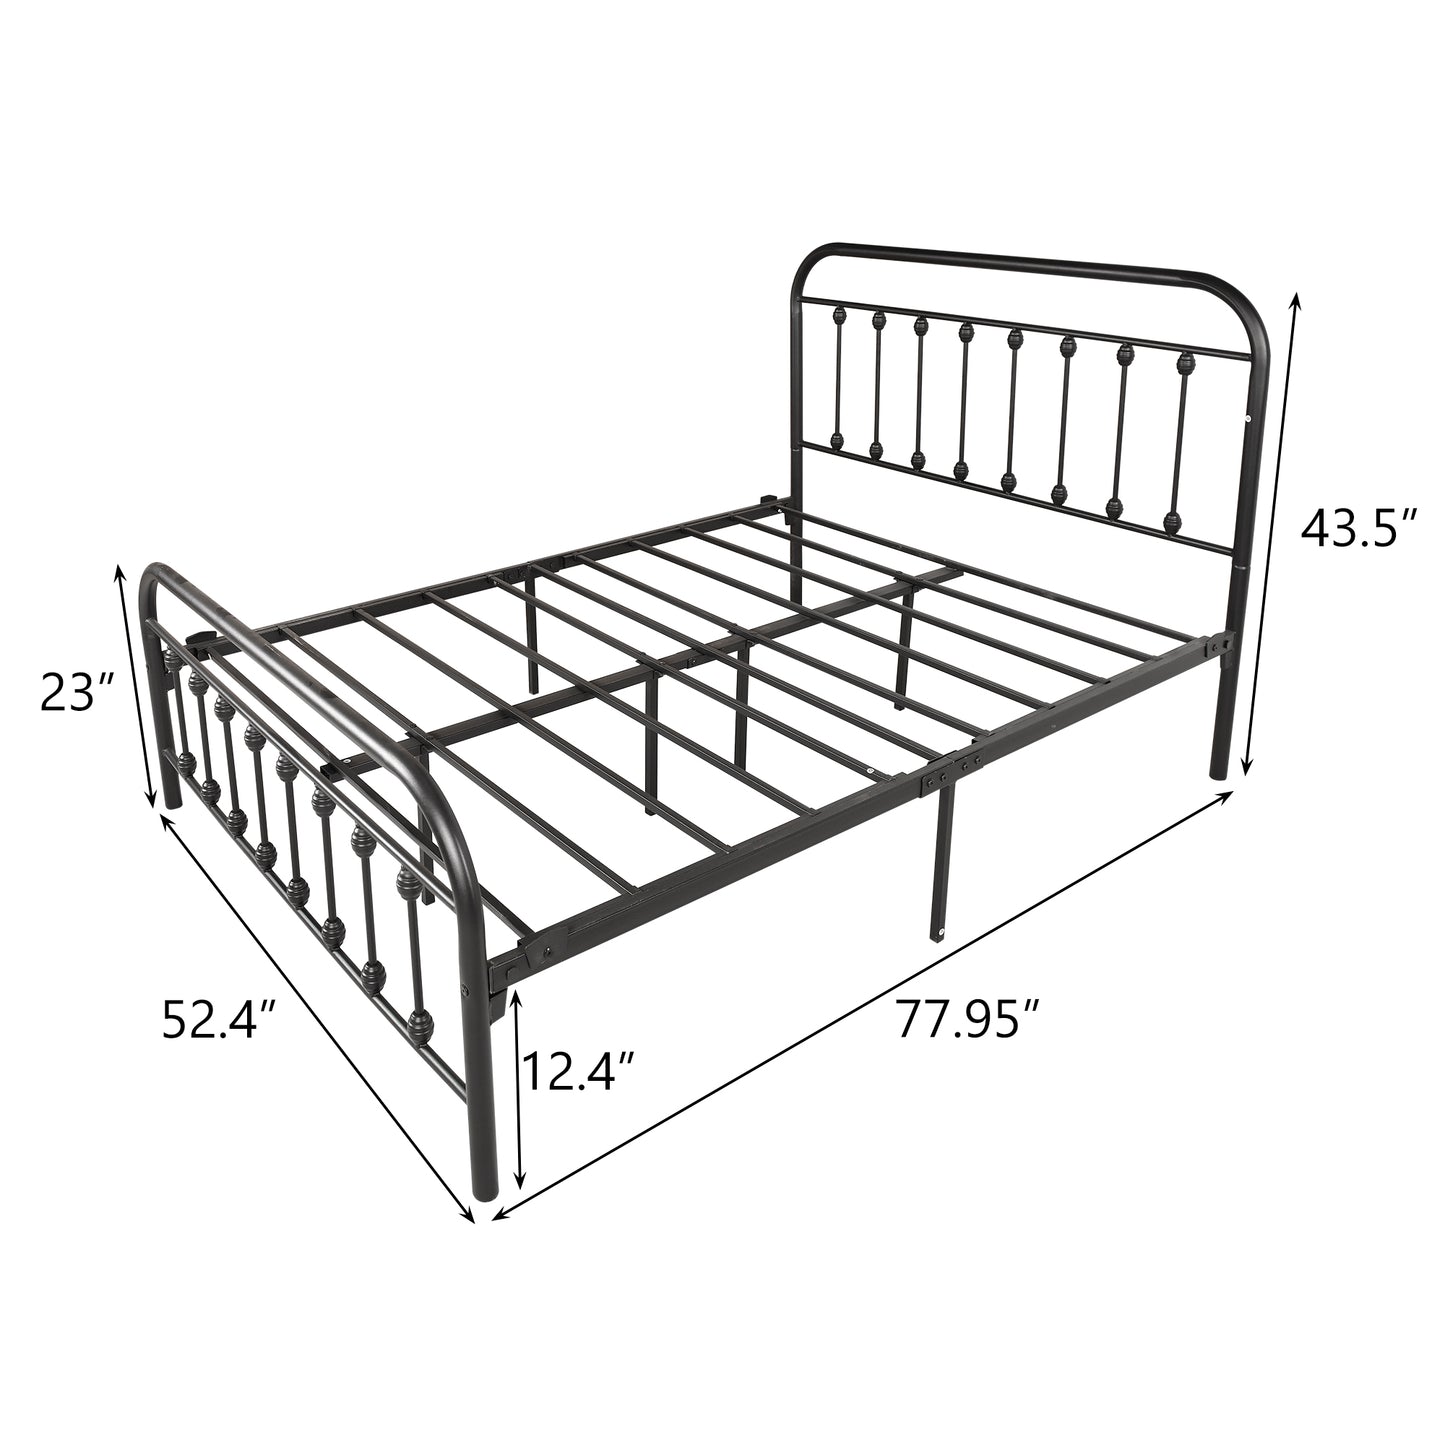 SYNGAR Black Full Bed Frame for Kids Teens Adults, Vintage Style Metal Platform Bed Frame with Headboard and Footboard, Heavy Duty Full Size Bed Frame Bedroom Furniture, No Box Spring Needed